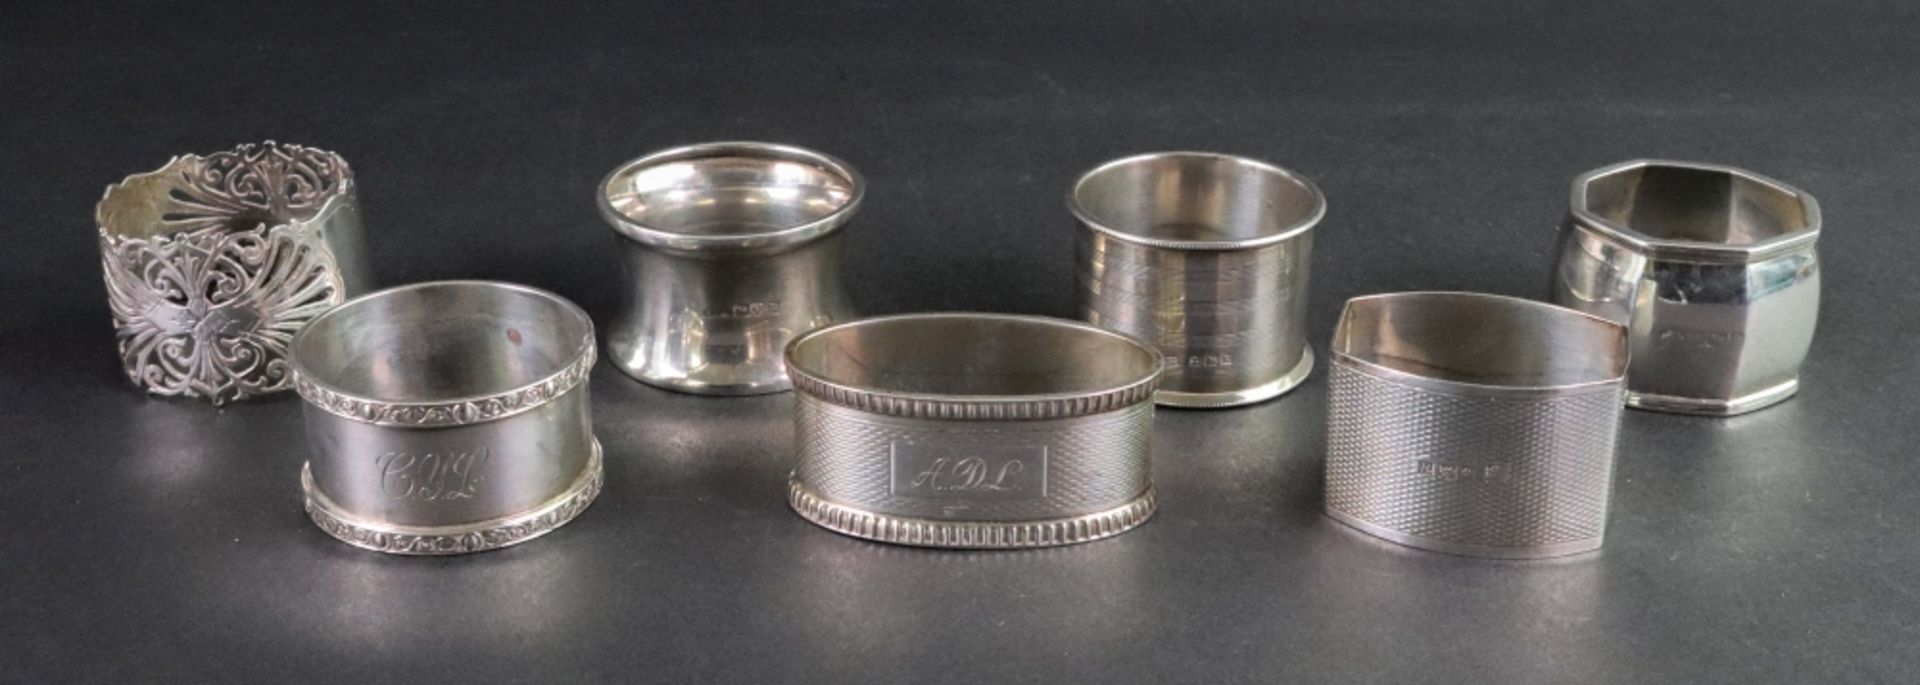 A group of seven silver napkin rings, mostly inscribed, 6.1ozs (7). - Image 2 of 2